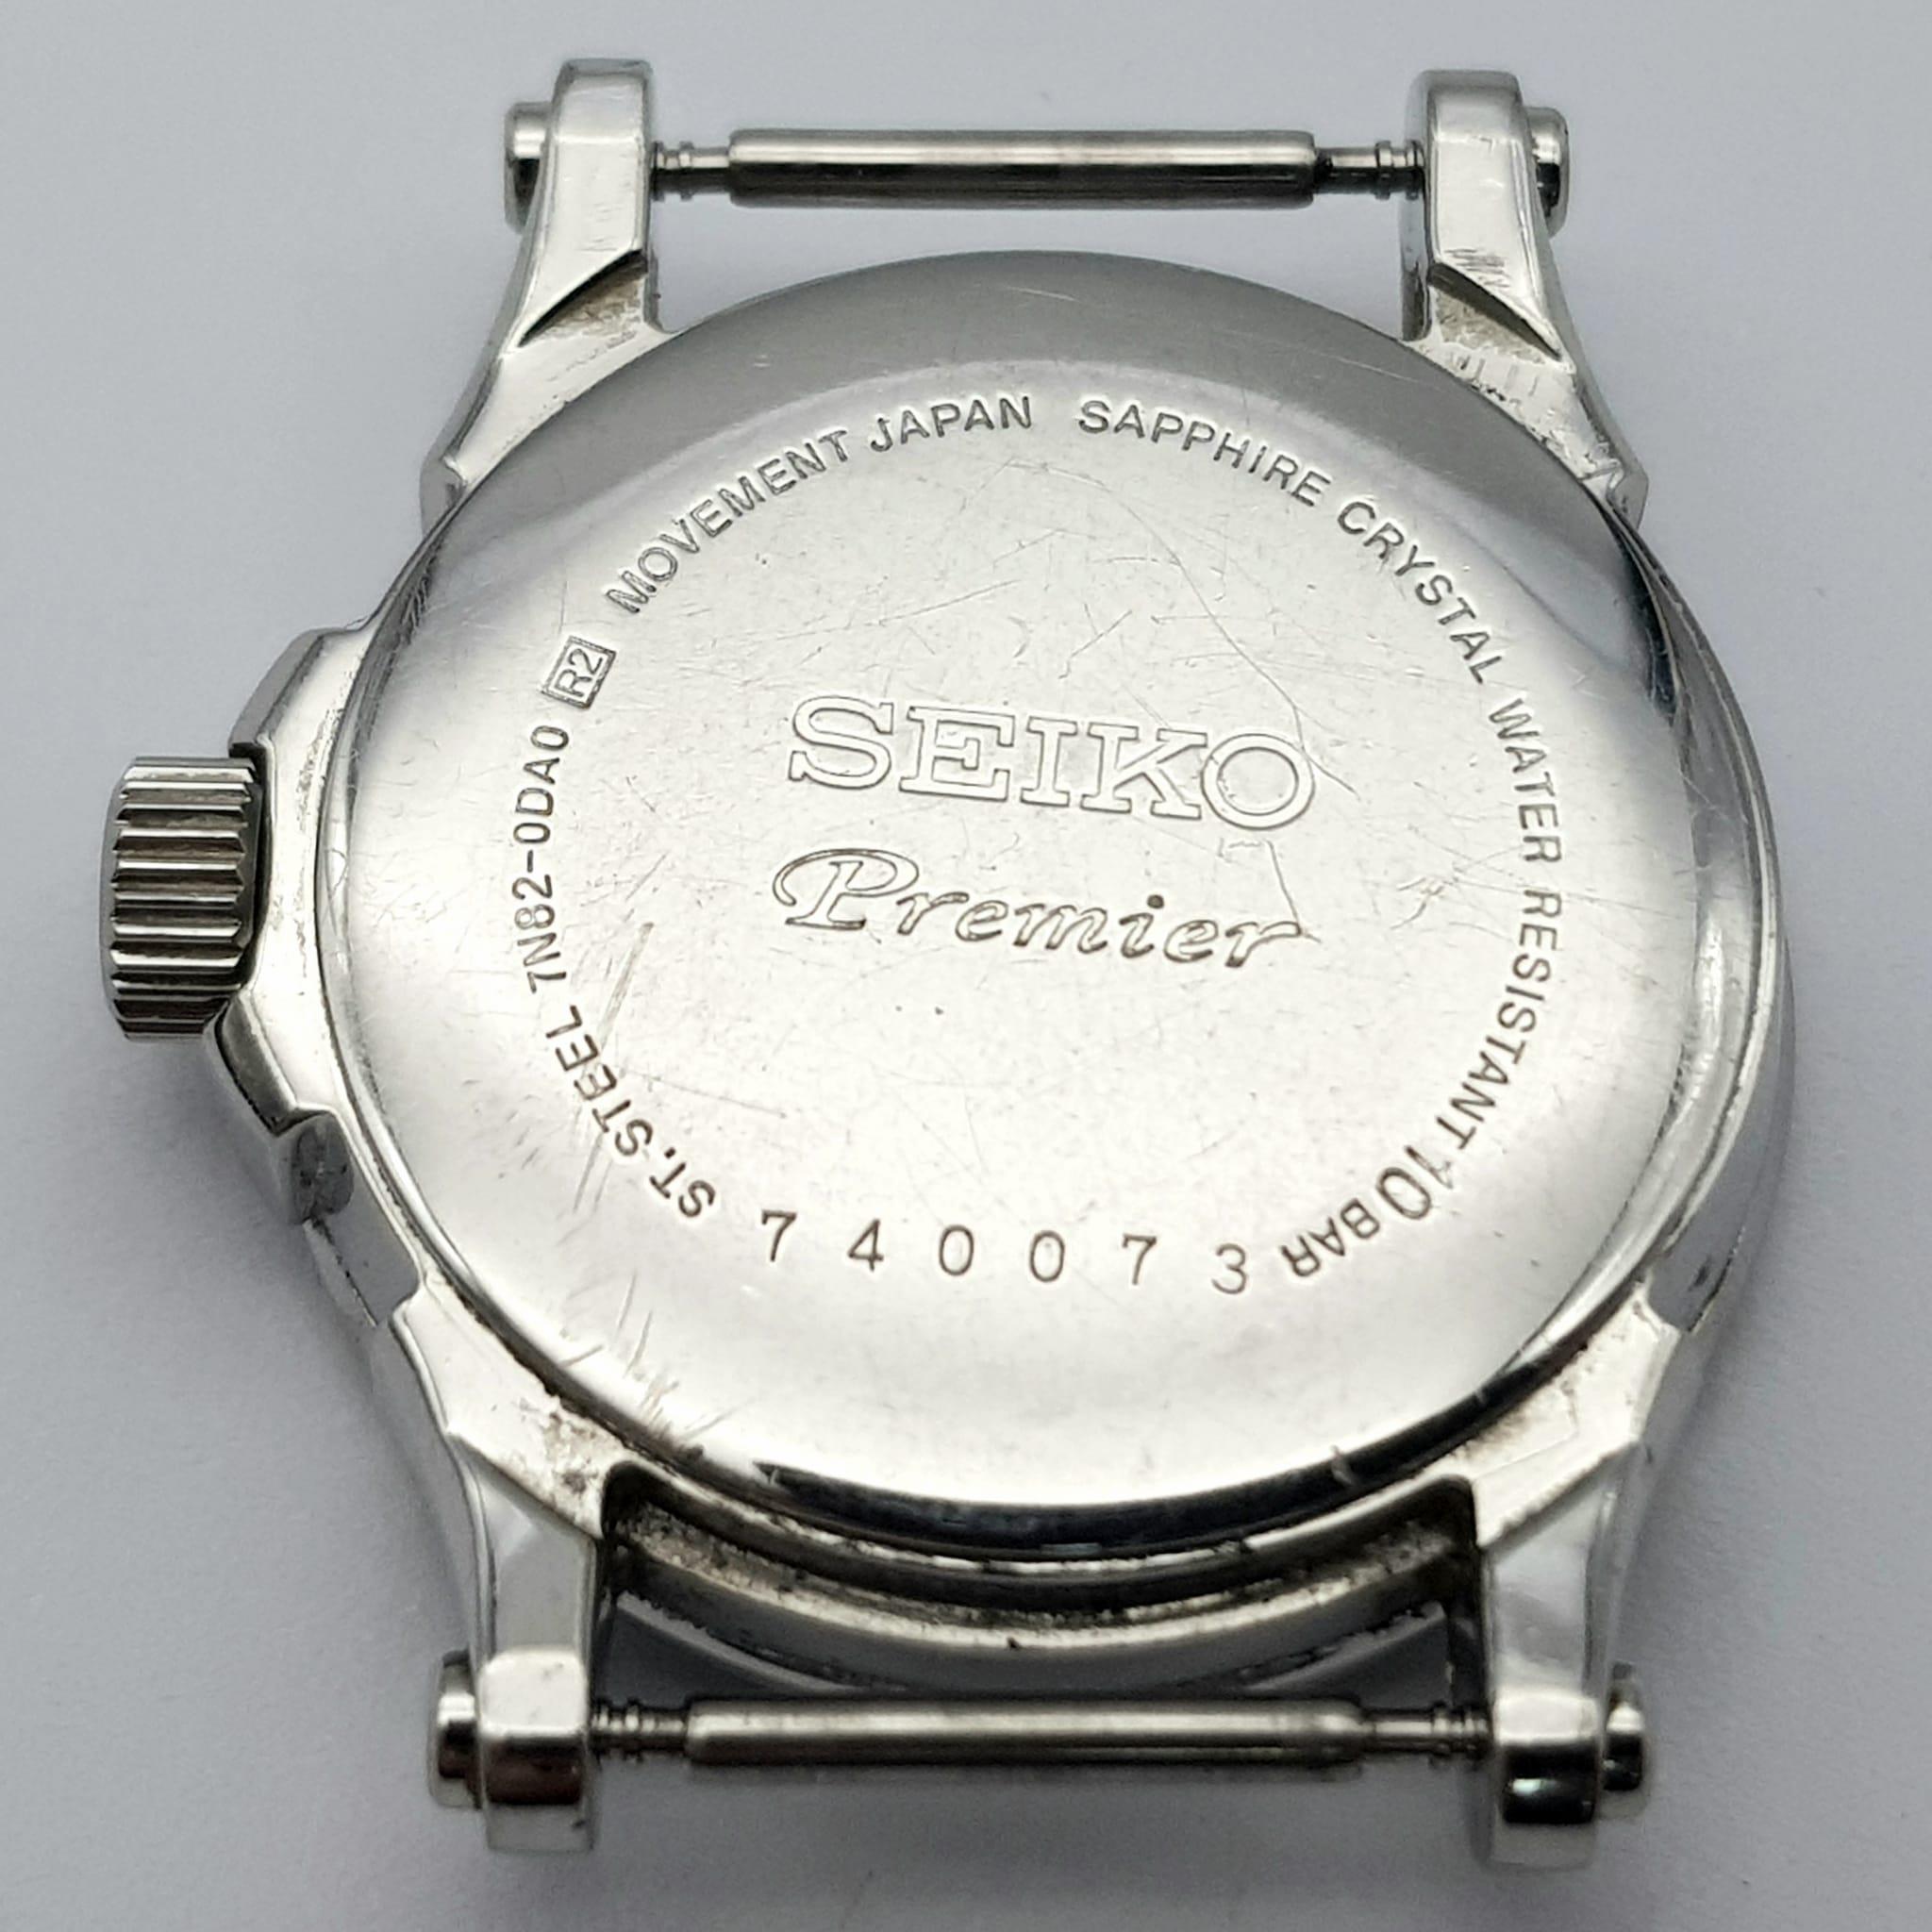 A Seiko Premier Ladies Diamond Watch Case. 27mm. Diamond bezel. Mother of pearl dial. In working - Image 7 of 7